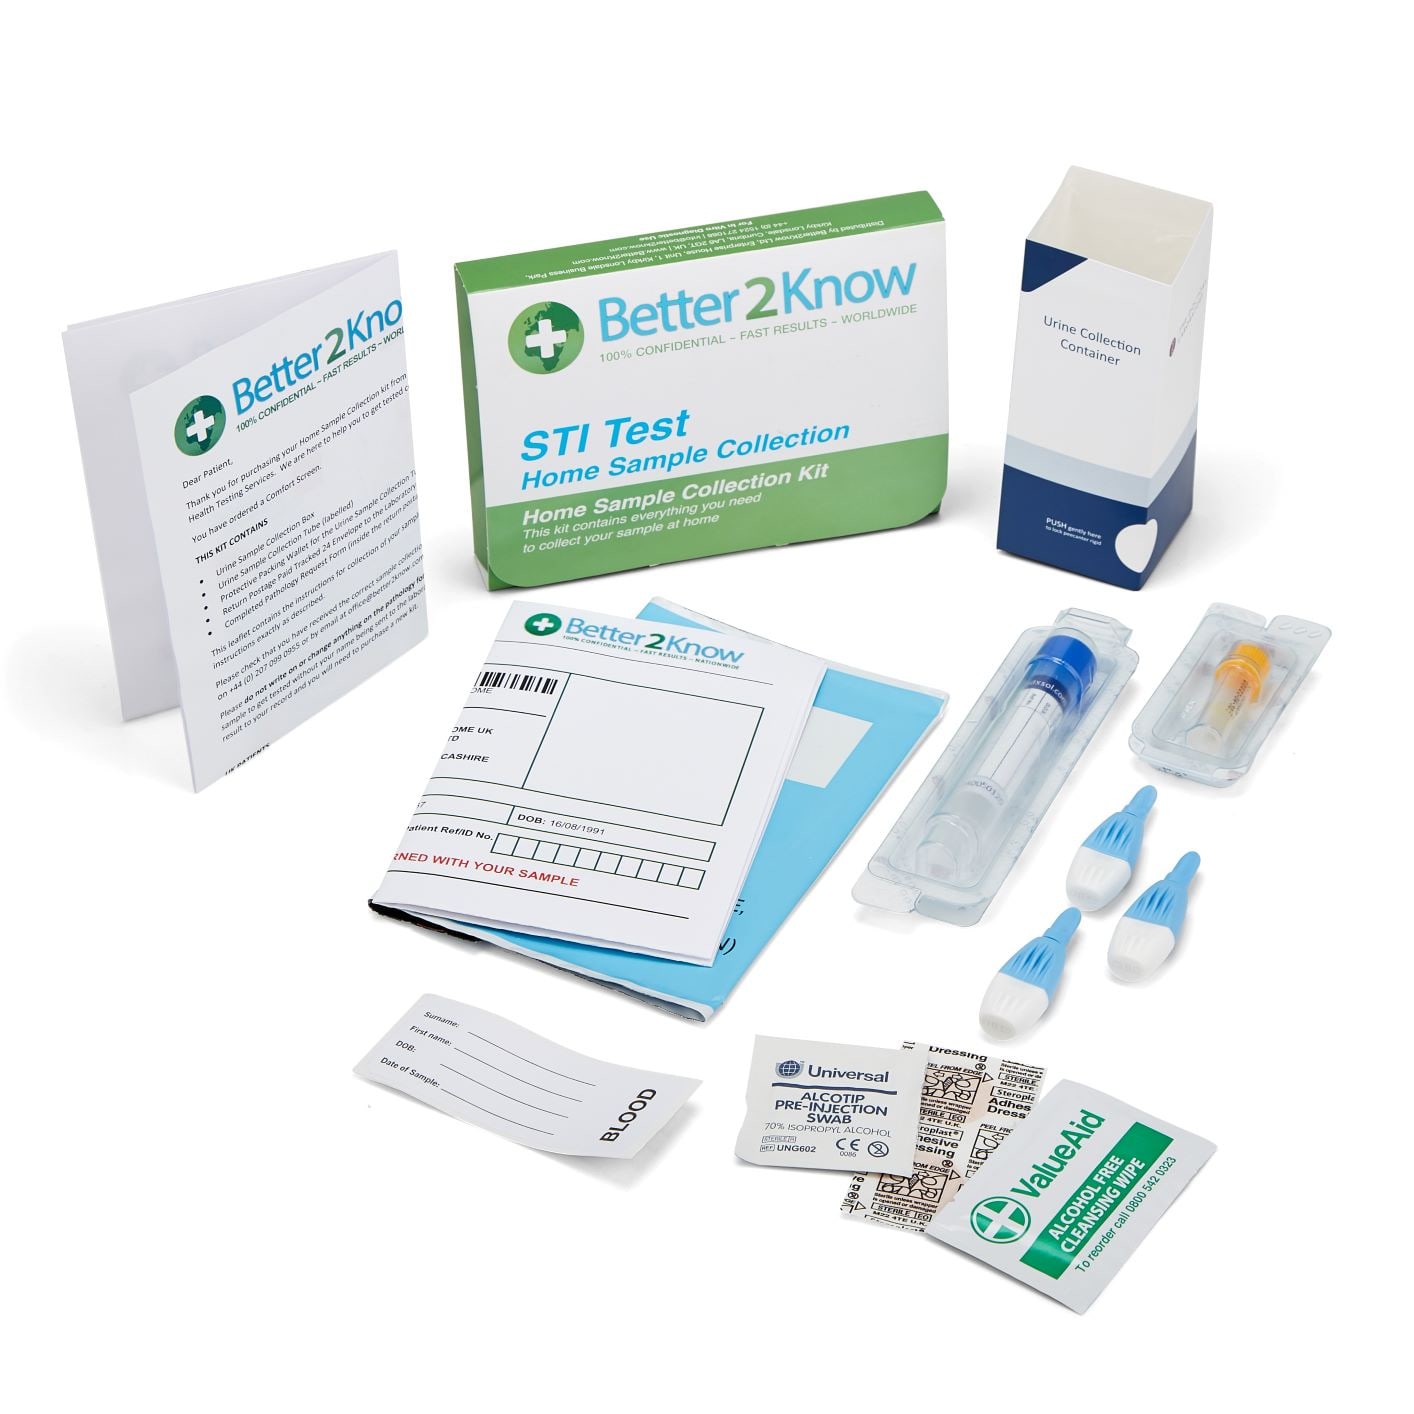 Better2Know&#039;s STI Four Screen tests for HIV, Chlamydia, Gonorrhoea and Syphilis.